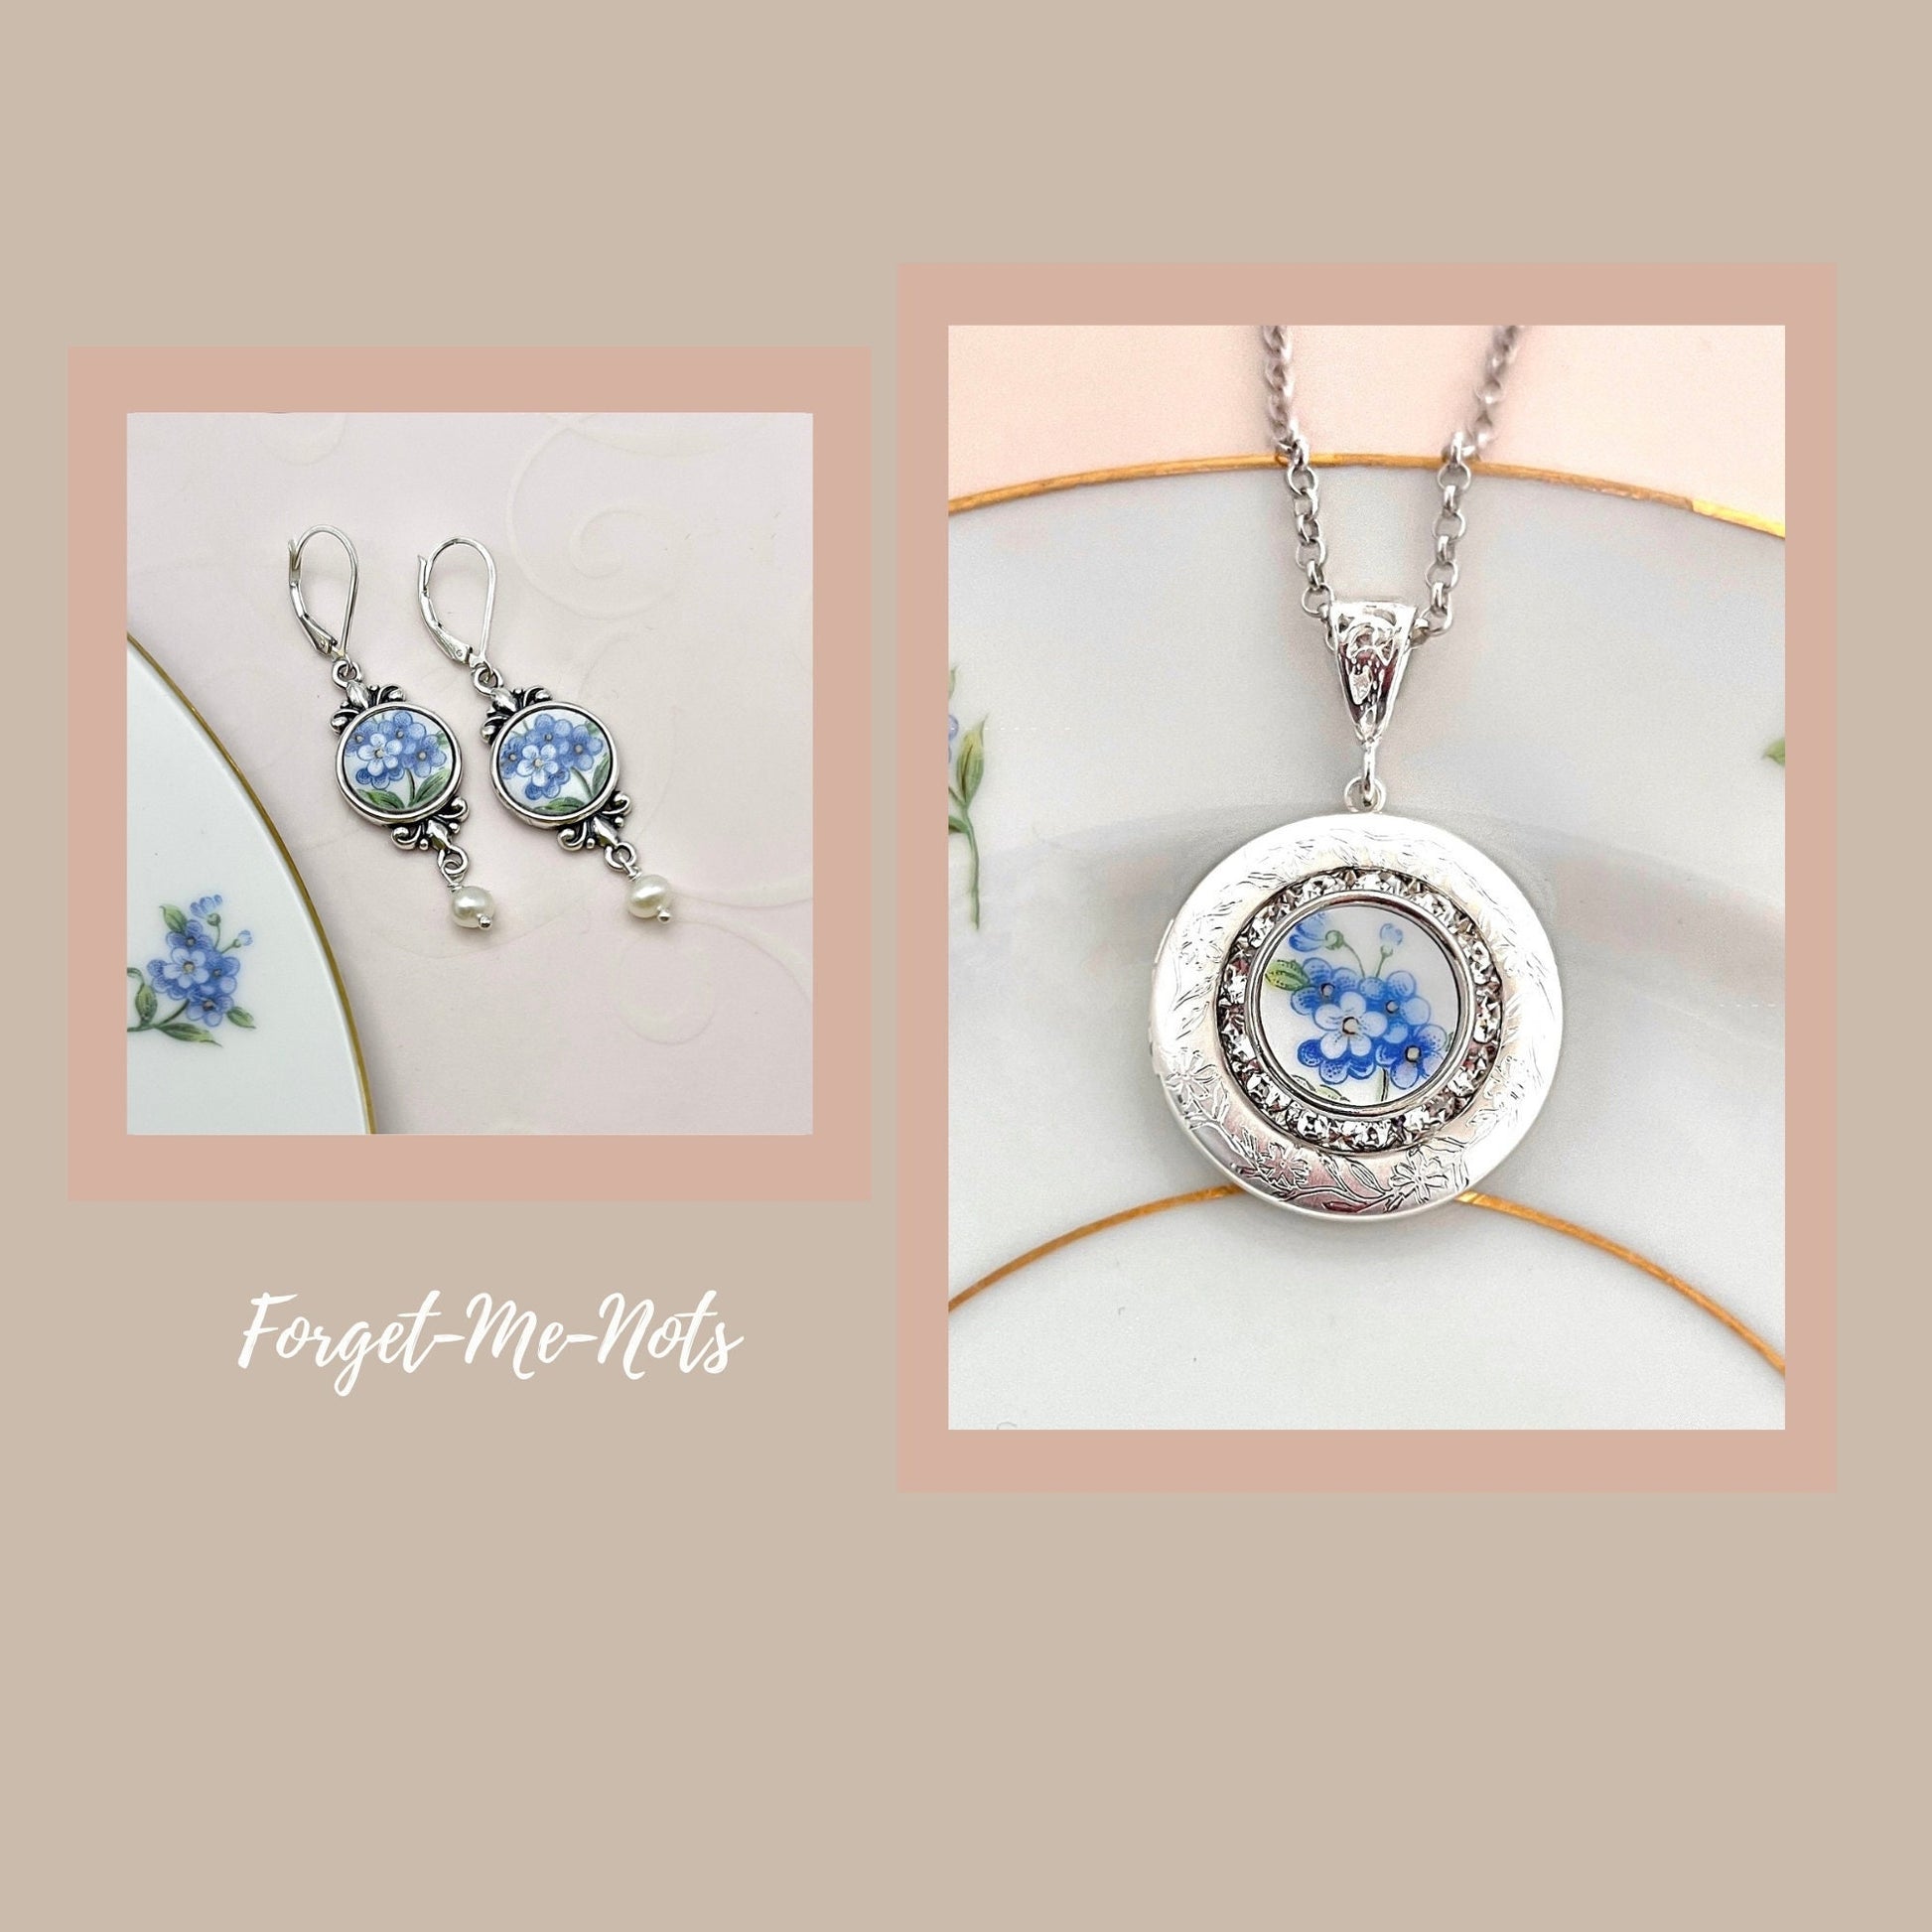 Forget Me Not Flower Locket Necklace Set, Broken China Jewelry, Unique Anniversary Gifts for Her